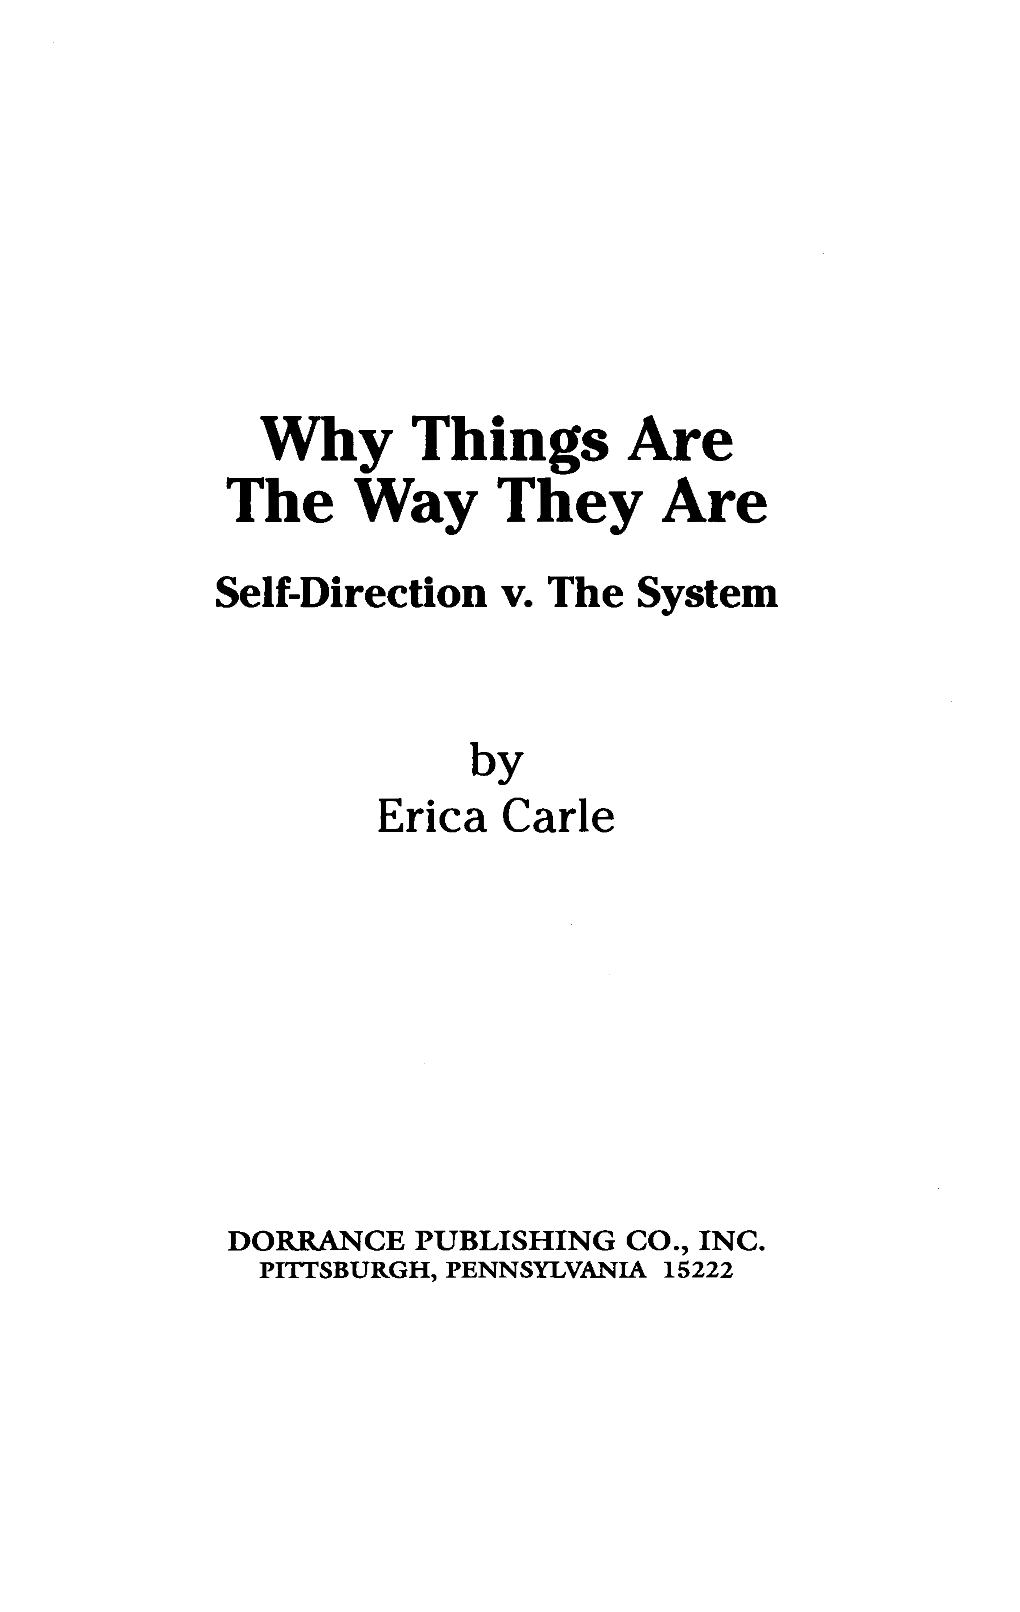 Download Why Things Are the Way They Are-Erica Carle-Self